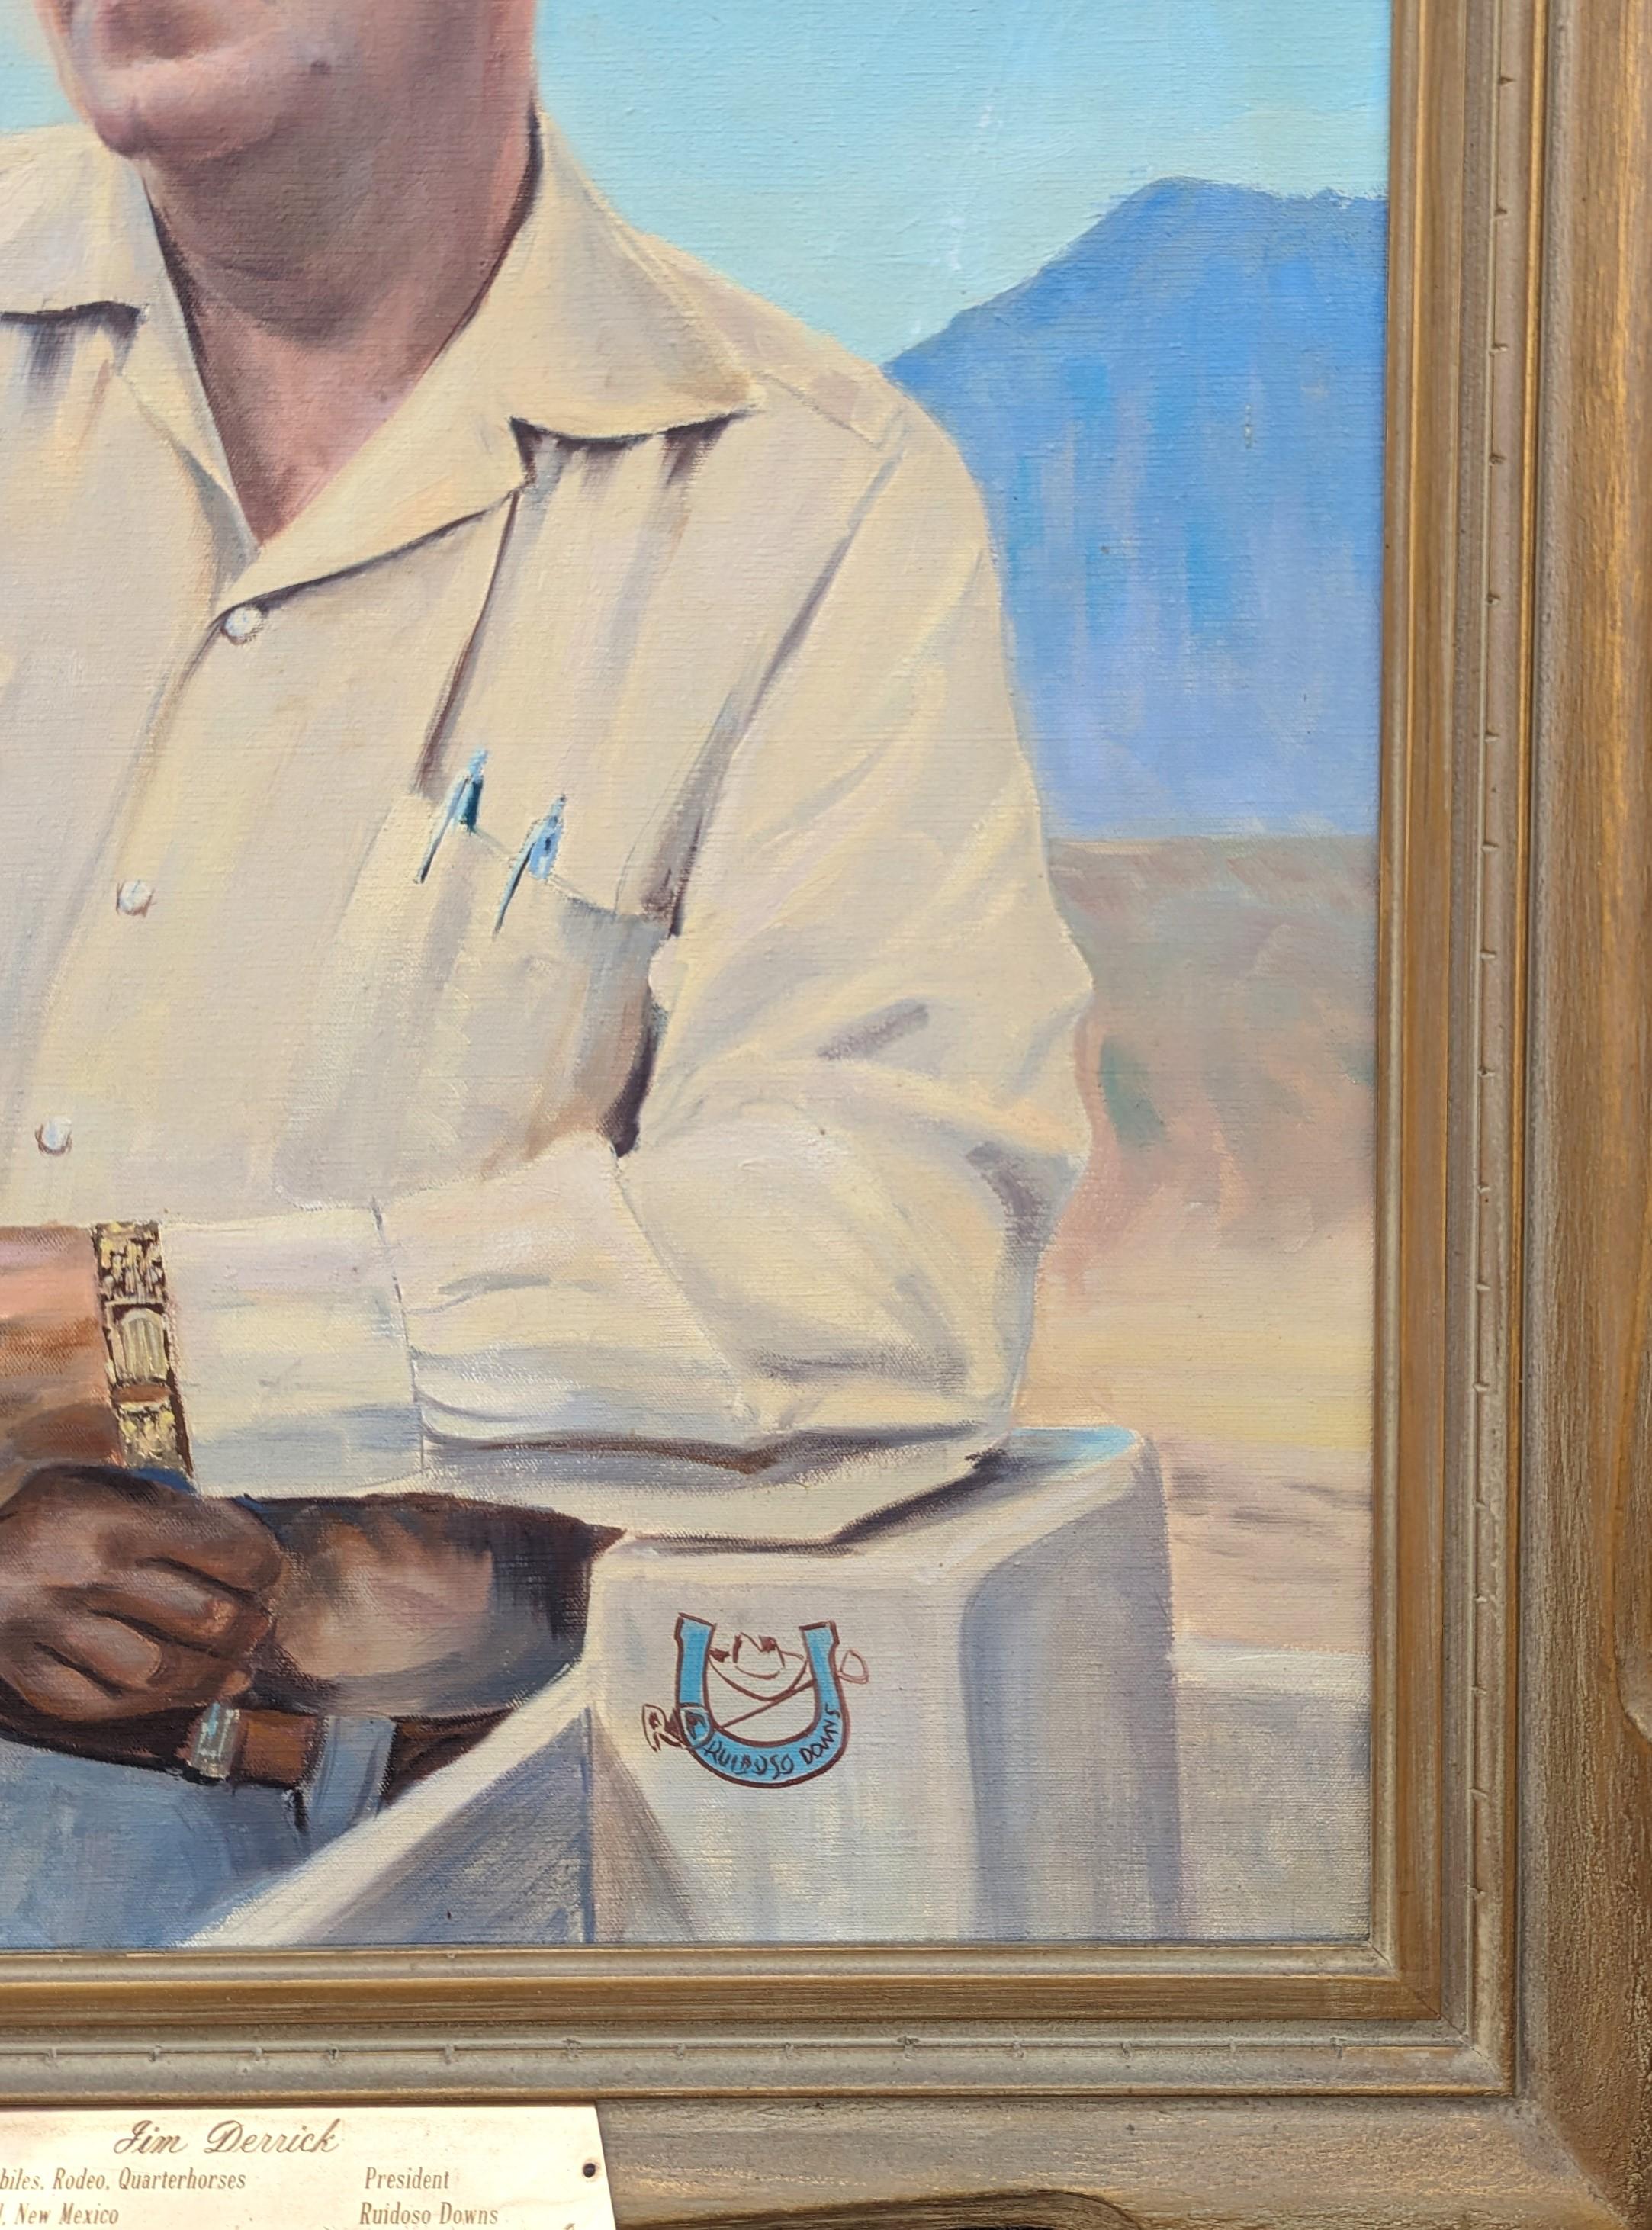 Naturalistic portrait of Jim Derrick by the artist Lou Benesch. The portrait features a central figure clad in a cowboy hat, nice work shirt, and a gold bracelet leaning against a post with the logo of Riodosa Downs. Signed by the artist in the